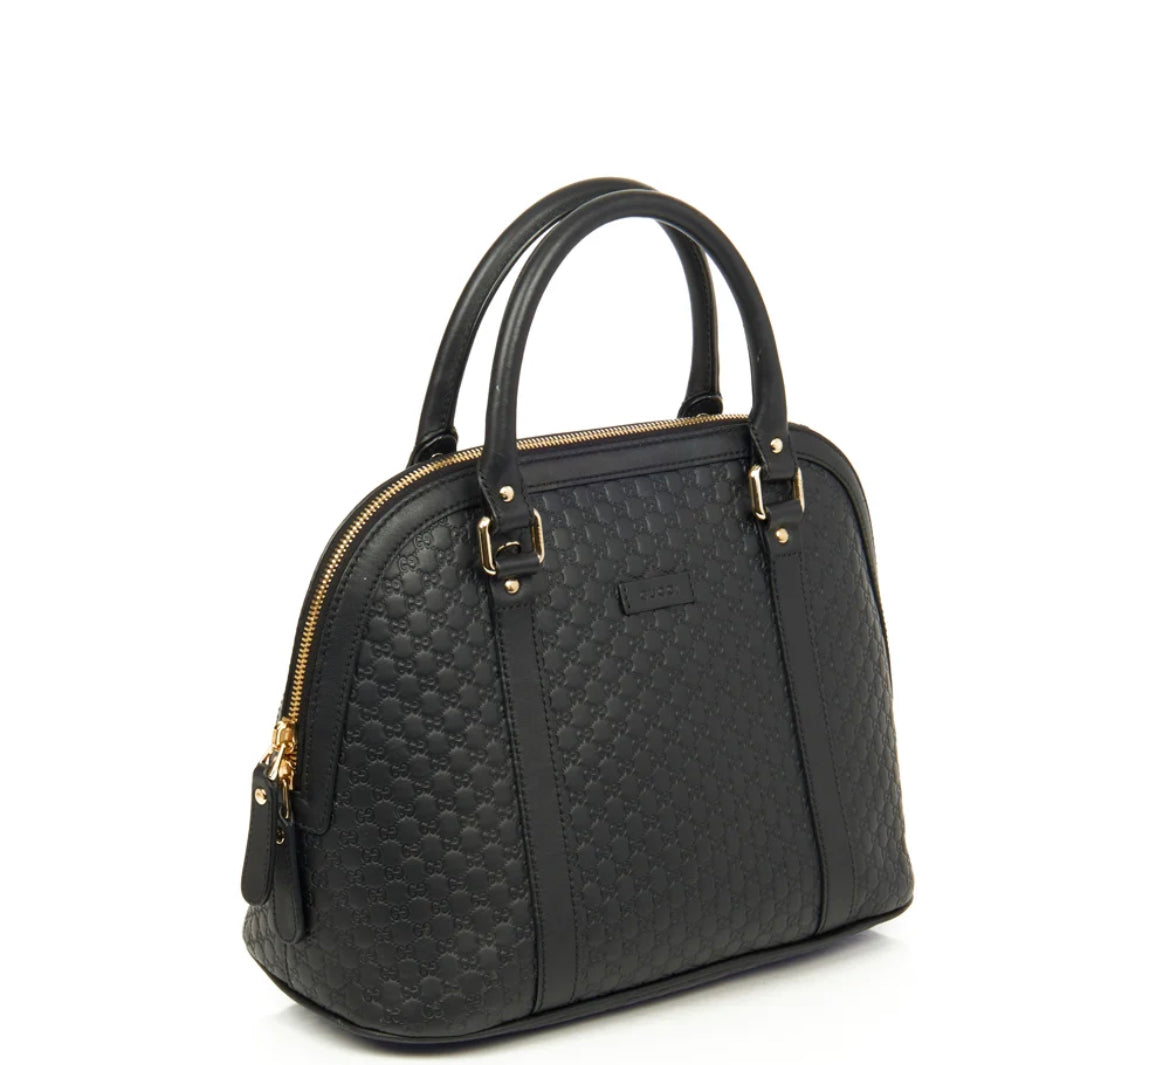 WOMENS GUCCI GG EMBOSSED GUCCISSIMA LEATHER TOTE BAG - BLACK